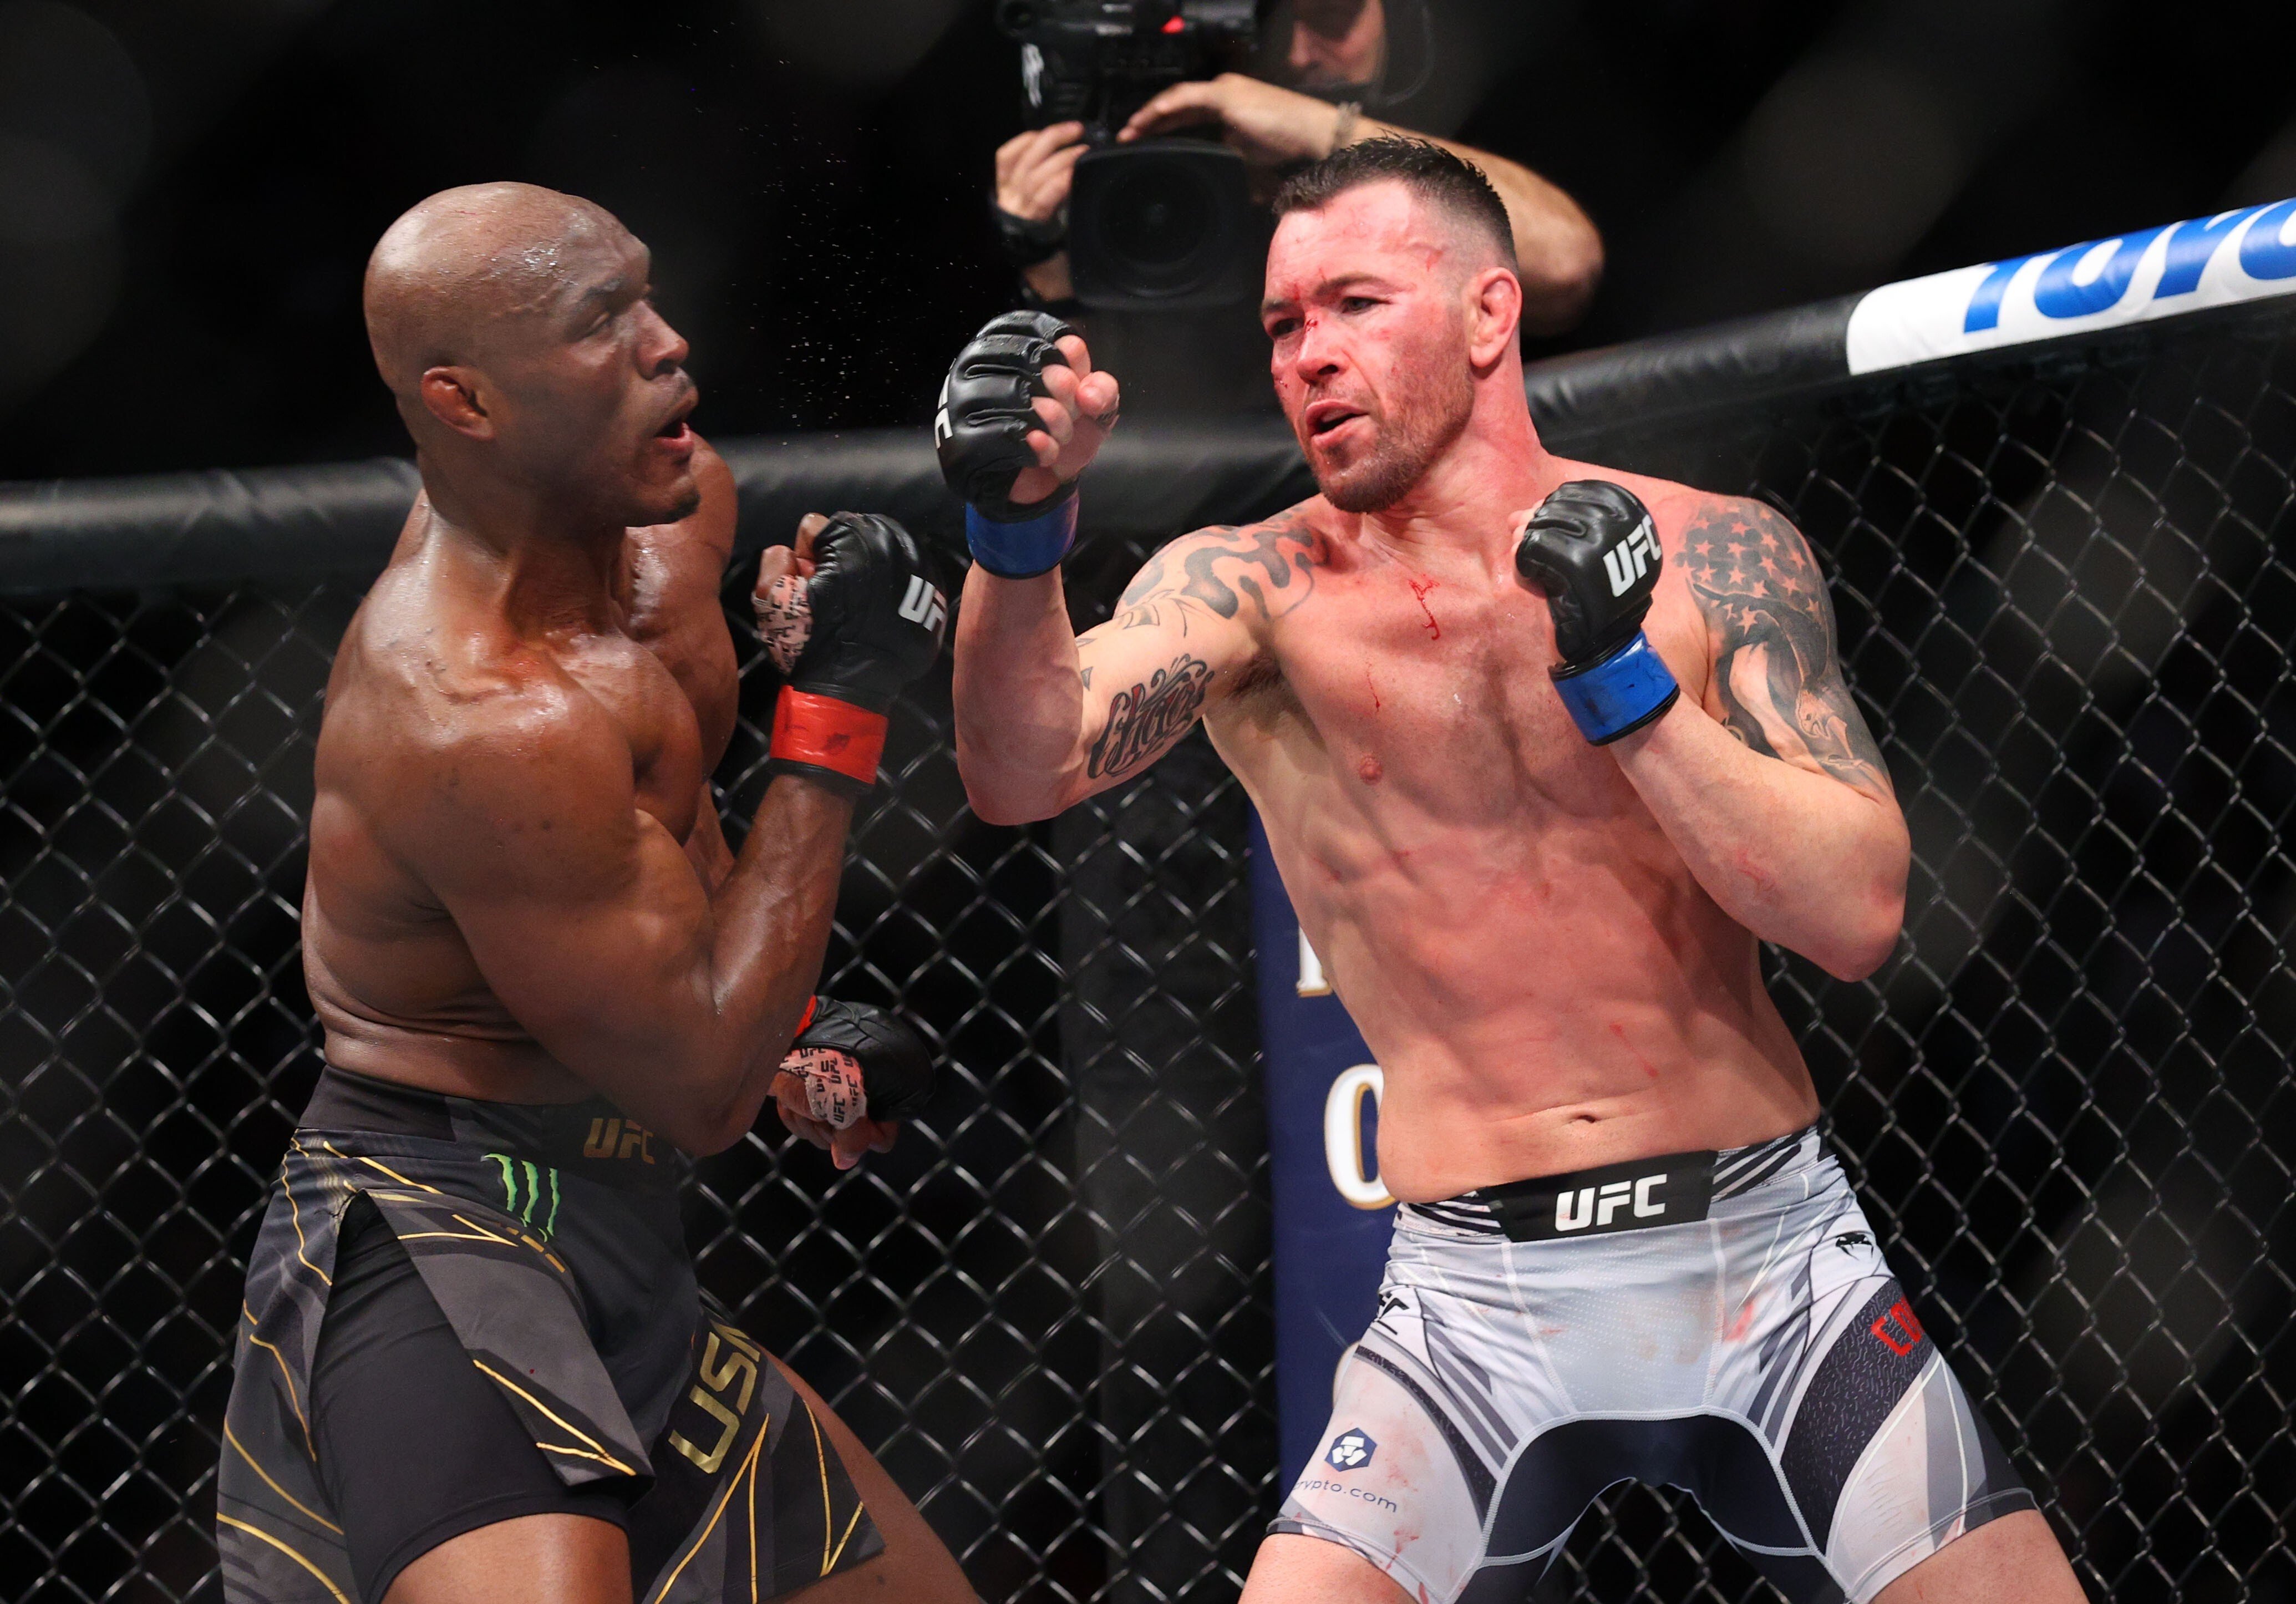 Colby Covington throws a punch against Kamaru Usman during UFC 268 at Madison Square Garden. Photo: Ed Mulholland/USA TODAY Sports